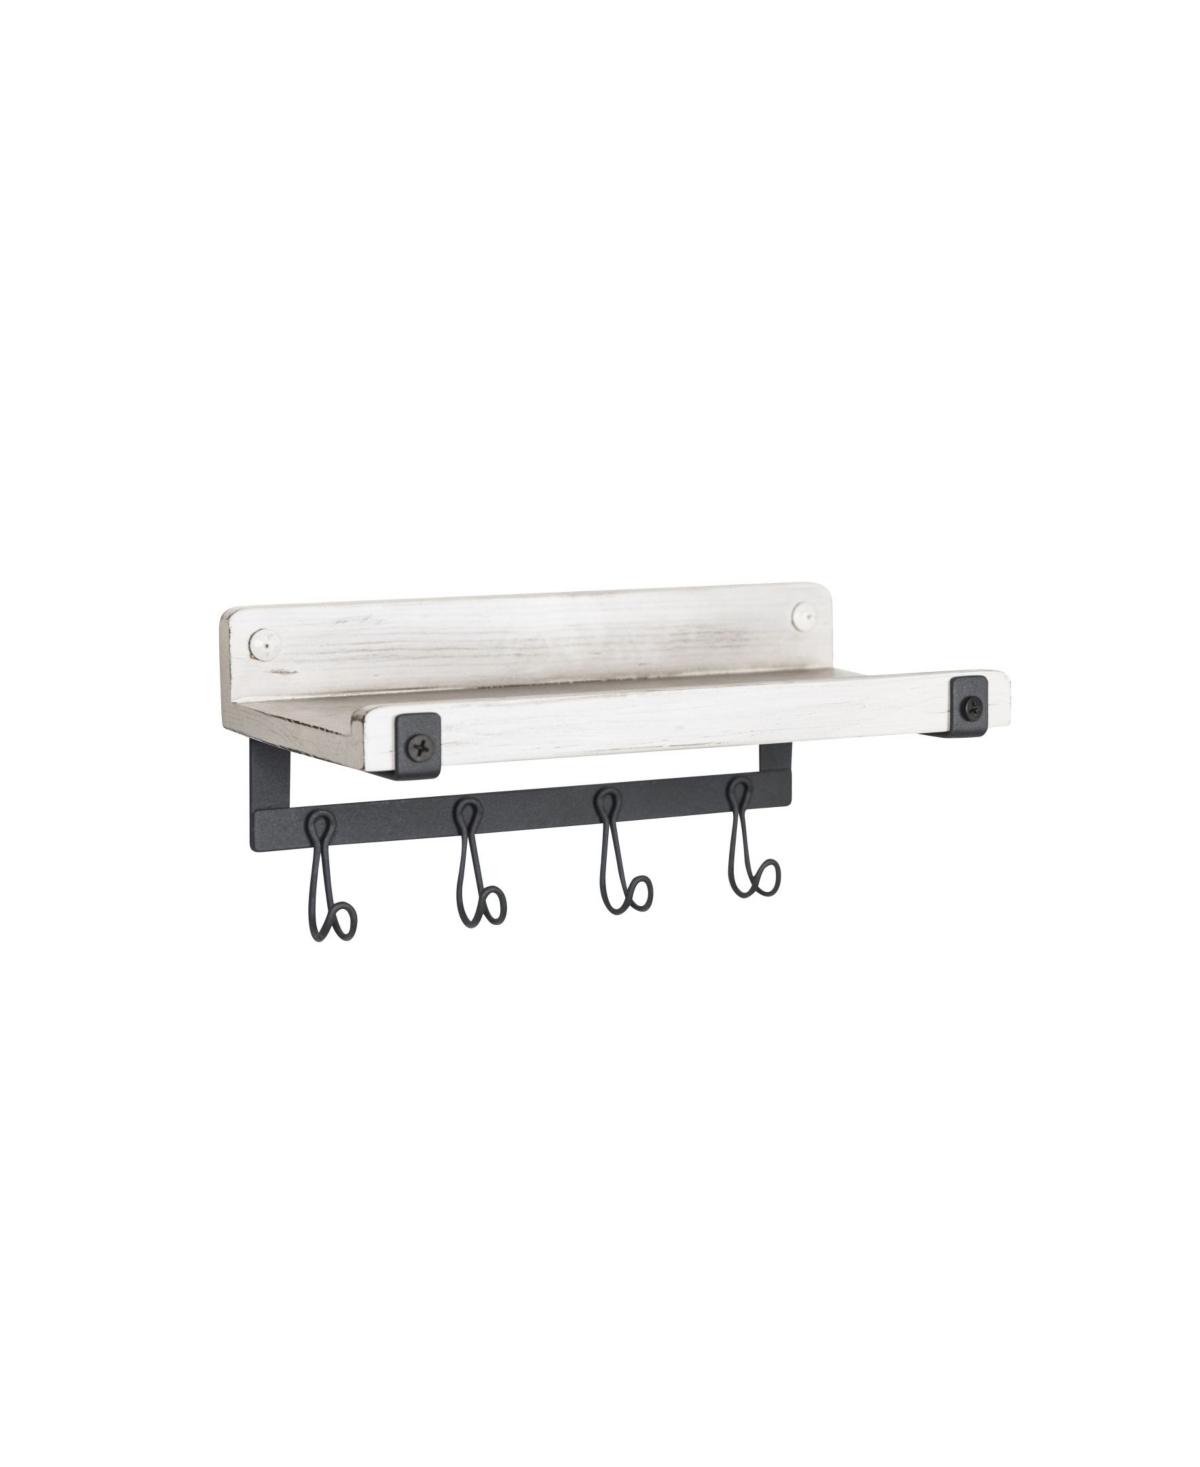 Shop Spectrum Rowan Wall Mount Valet Hook Station In White Wash And Industrial Gray